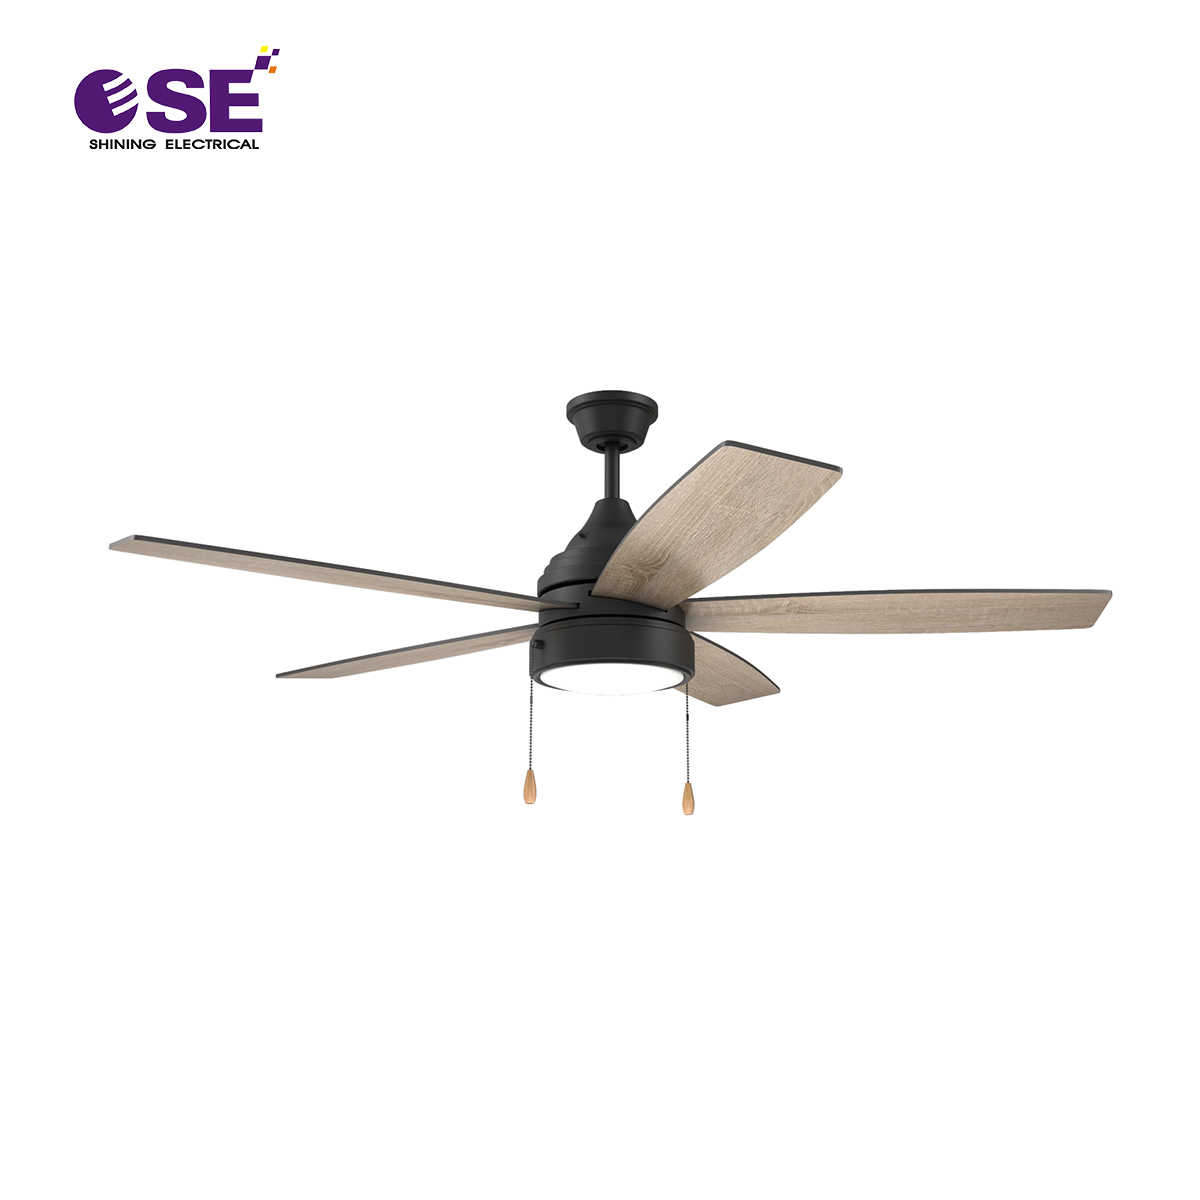 52 inch Plywood blade full copper motor decorate ceiling fans with Pull chain control